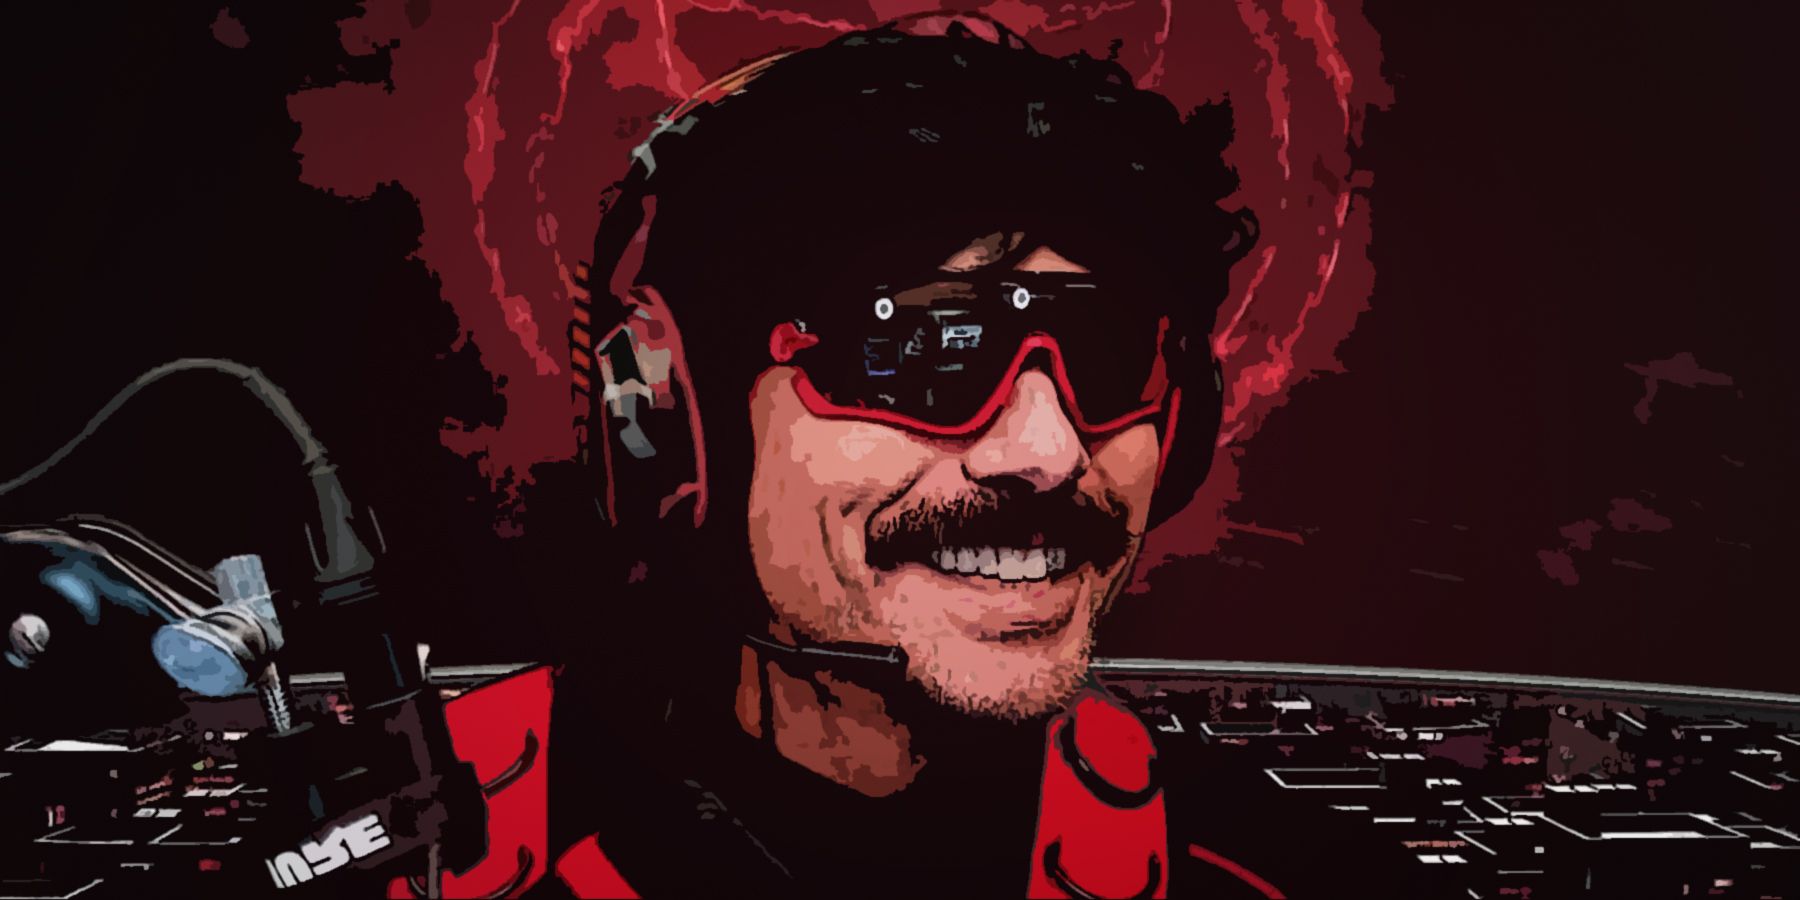 Dr Disrespect breaks character smiling during stream